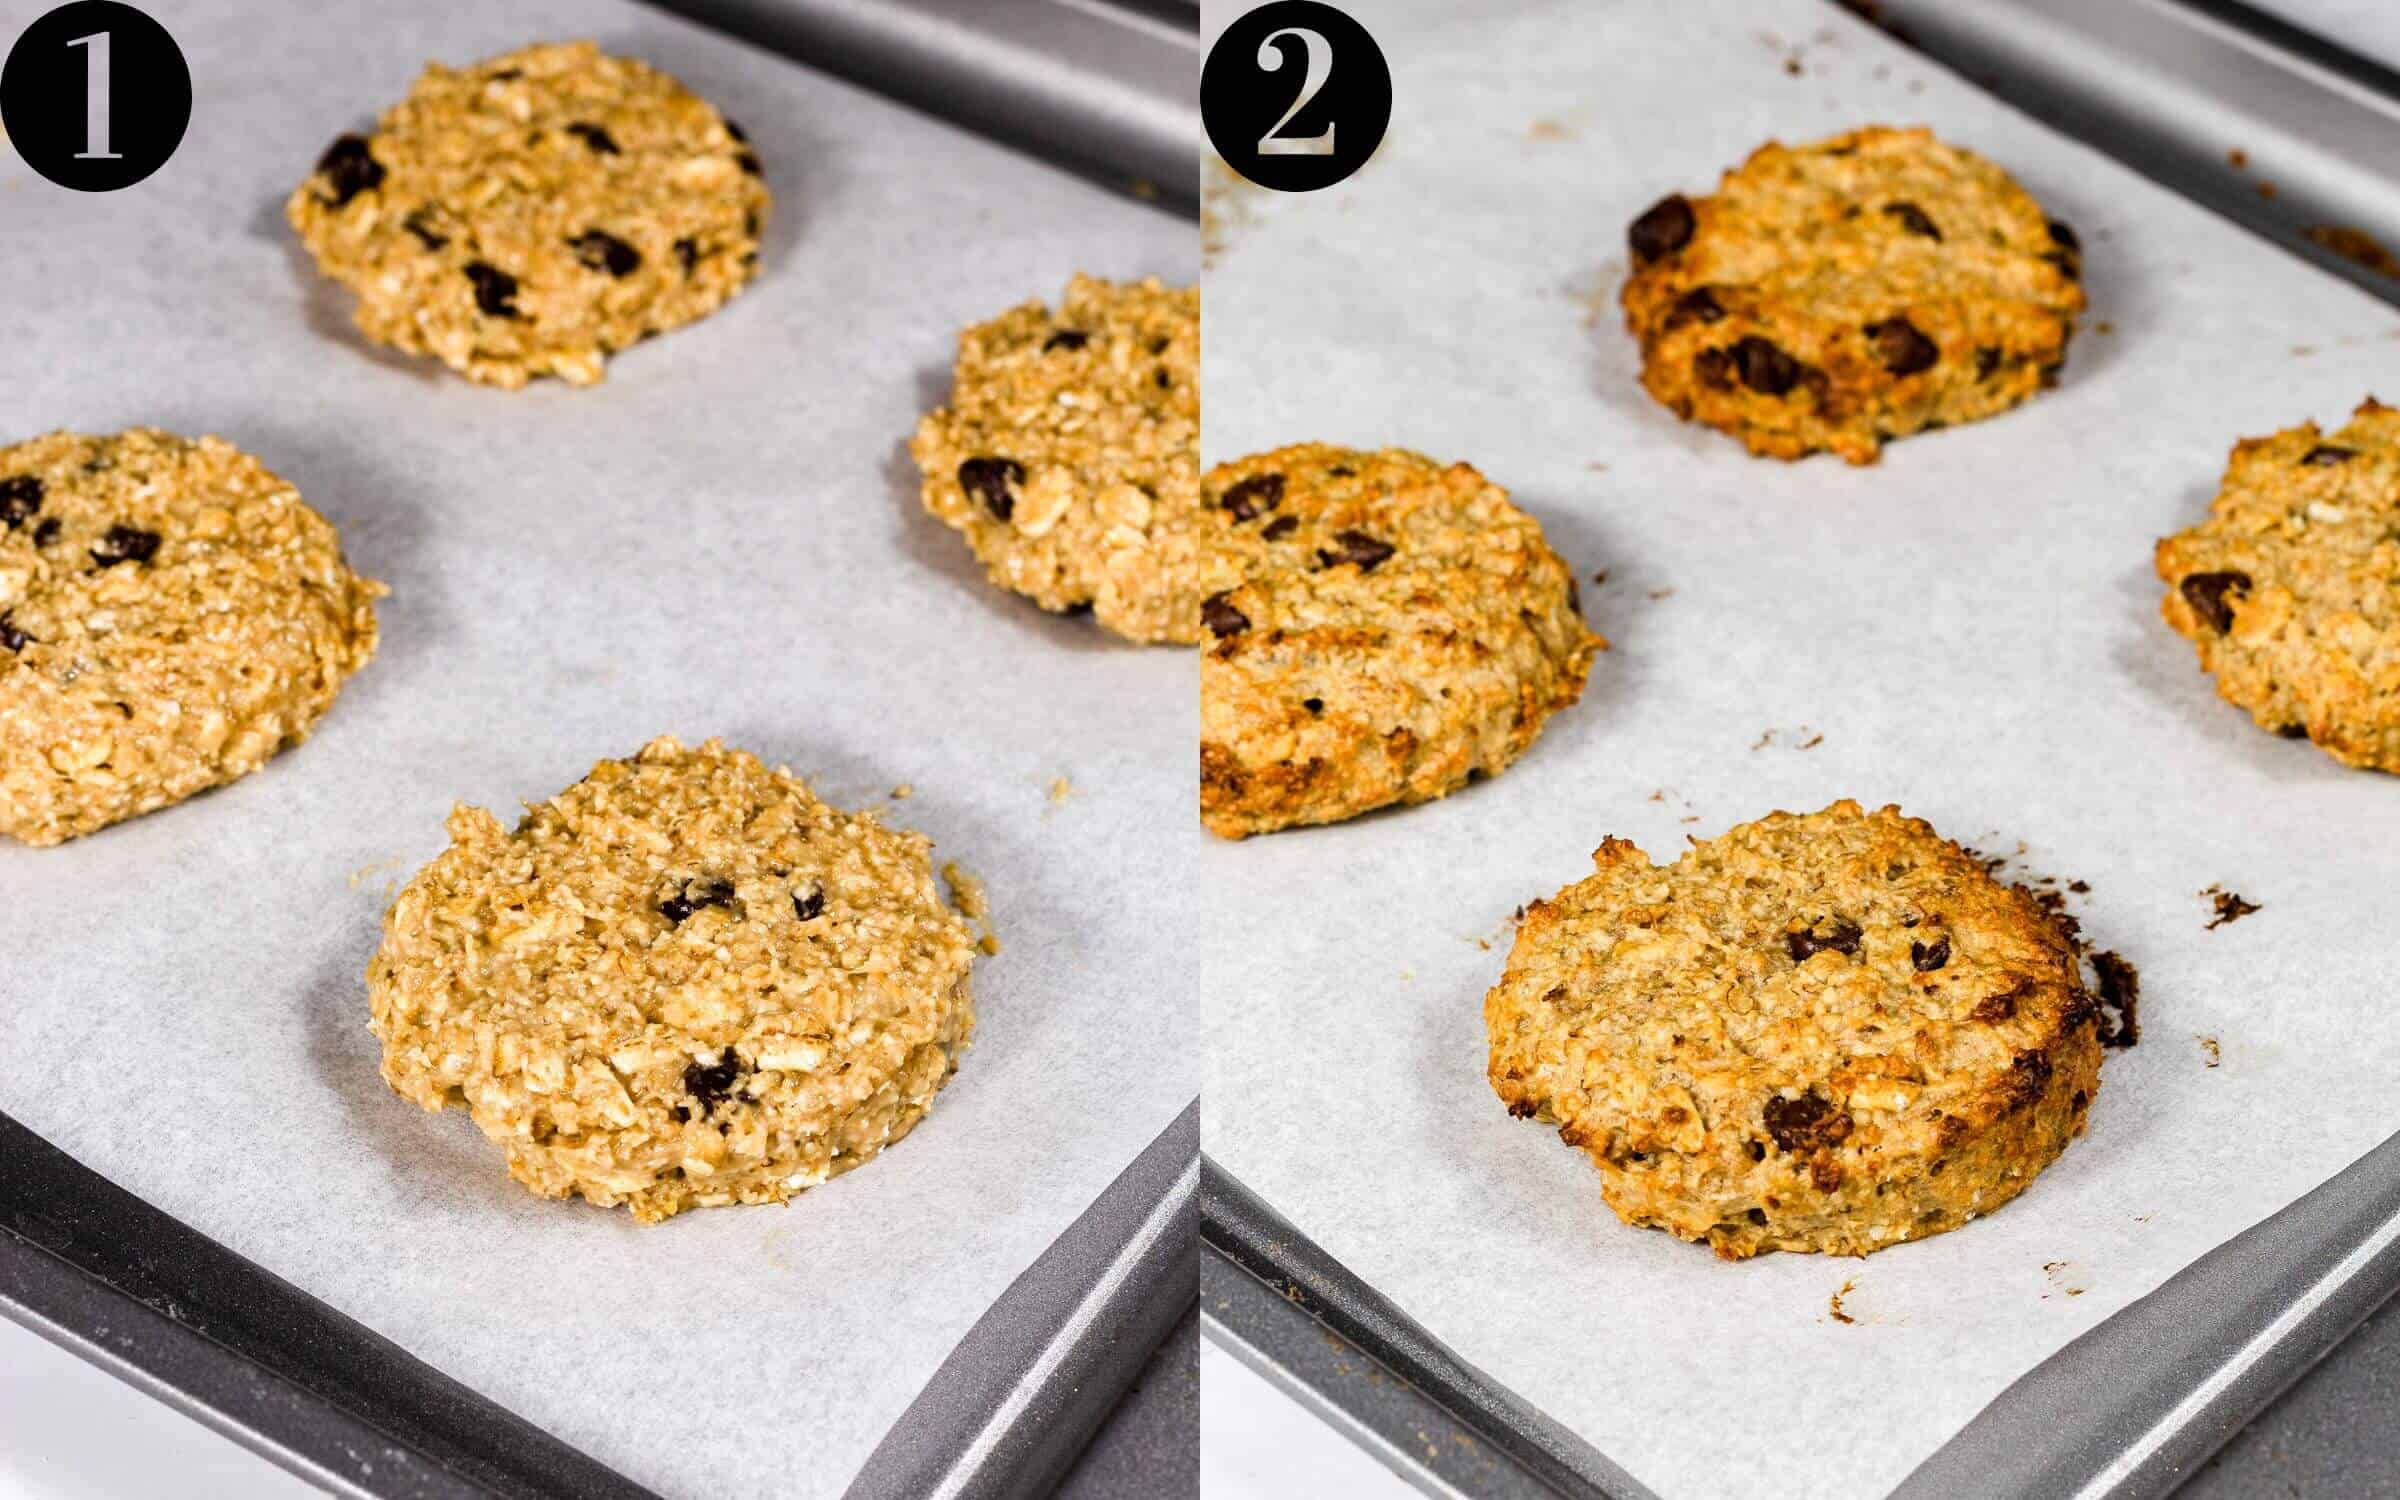 Oatmeal Cookies on a baking tray before and after baking.